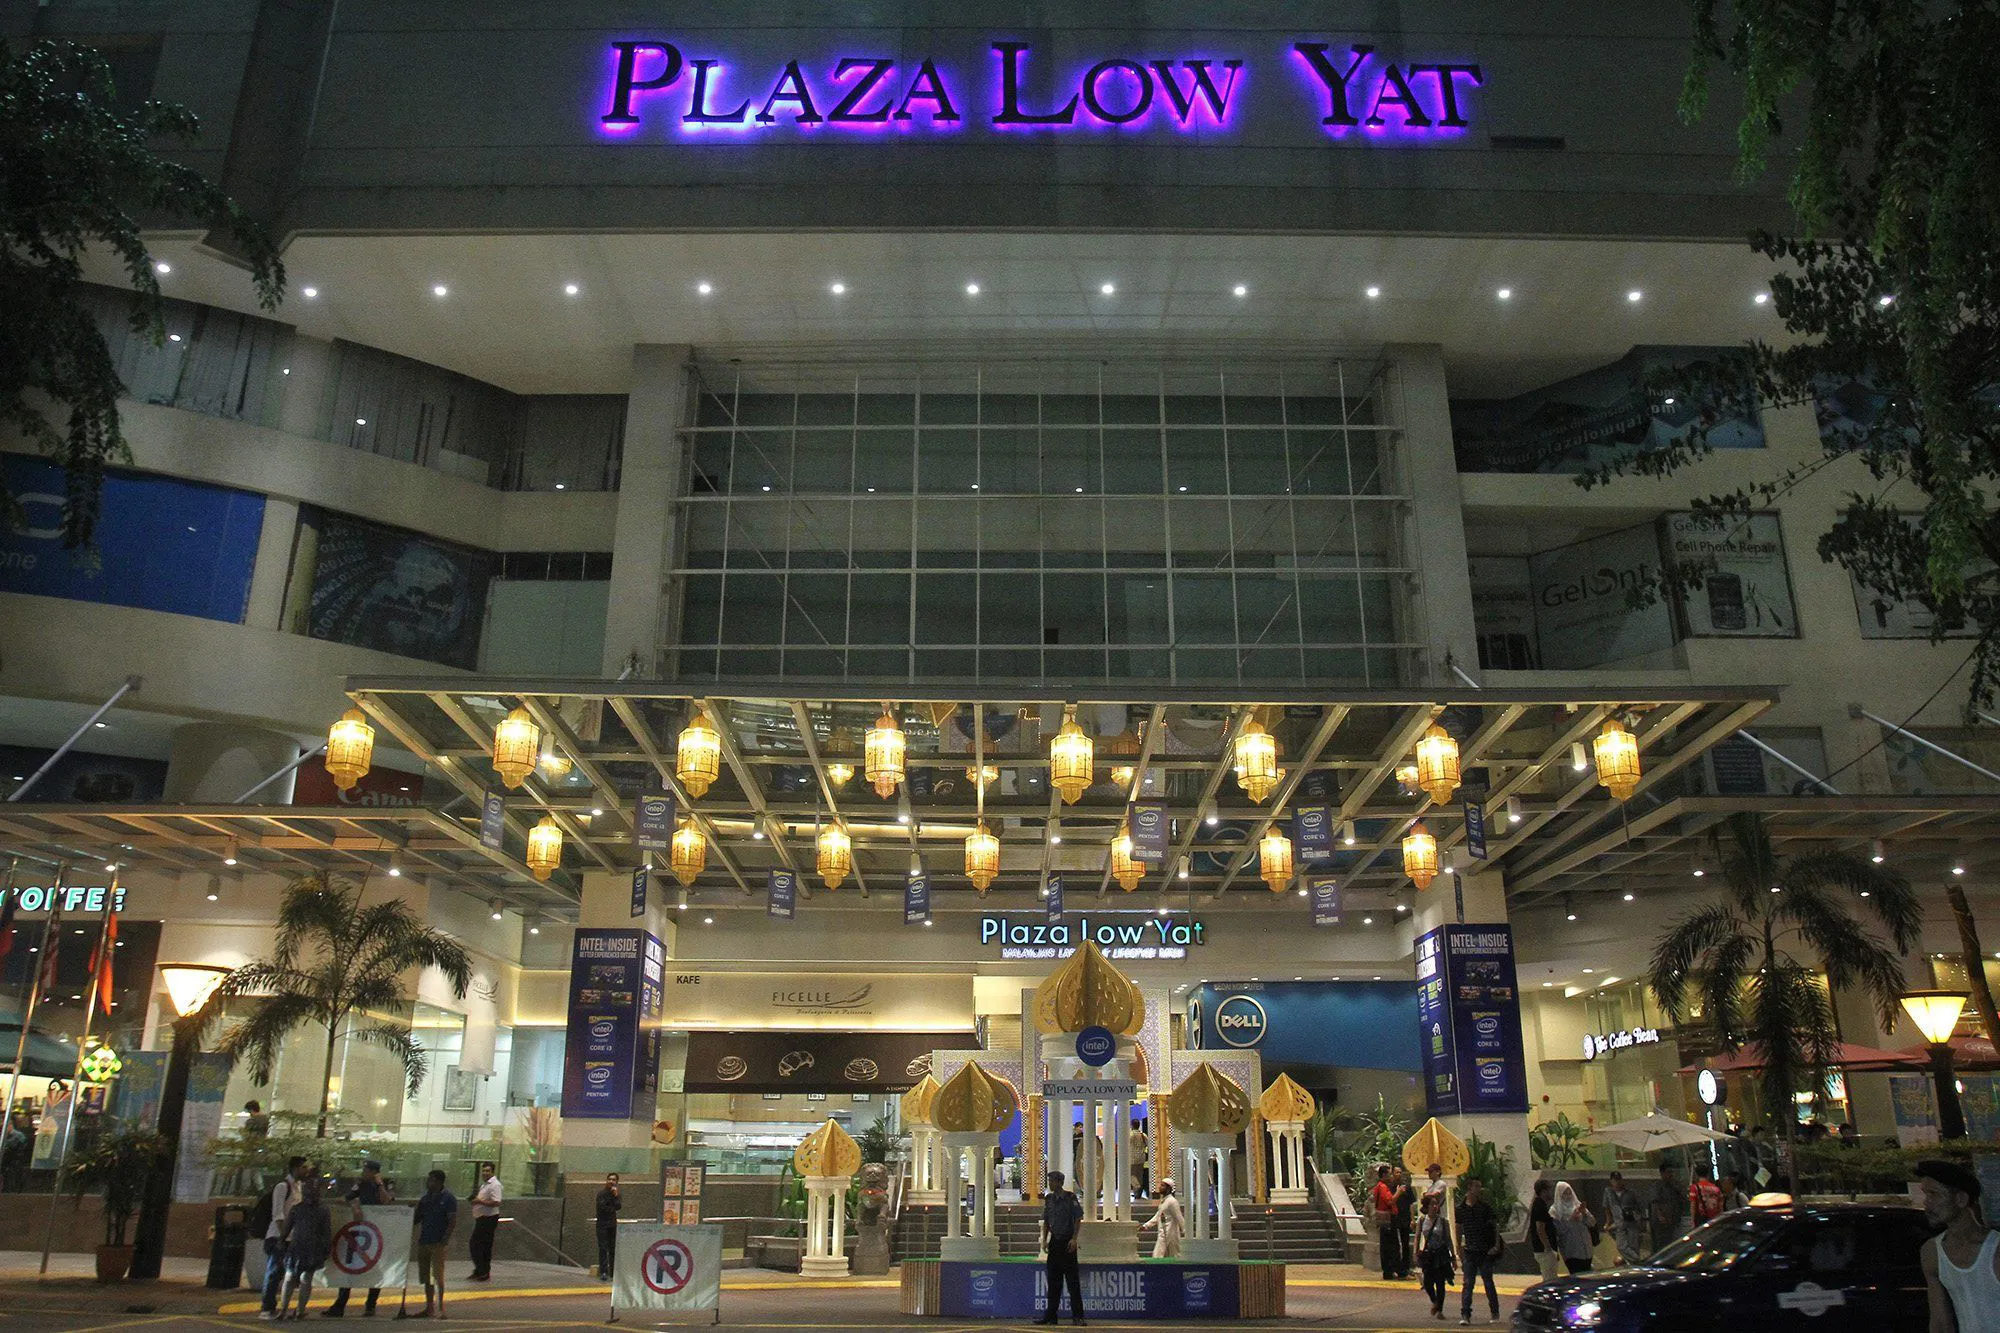 Plaza Low Yat in Malaysia, east_asia | Sporting Equipment,Handbags,Shoes,Clothes,Natural Beauty Products,Cosmetics,Sportswear - Country Helper